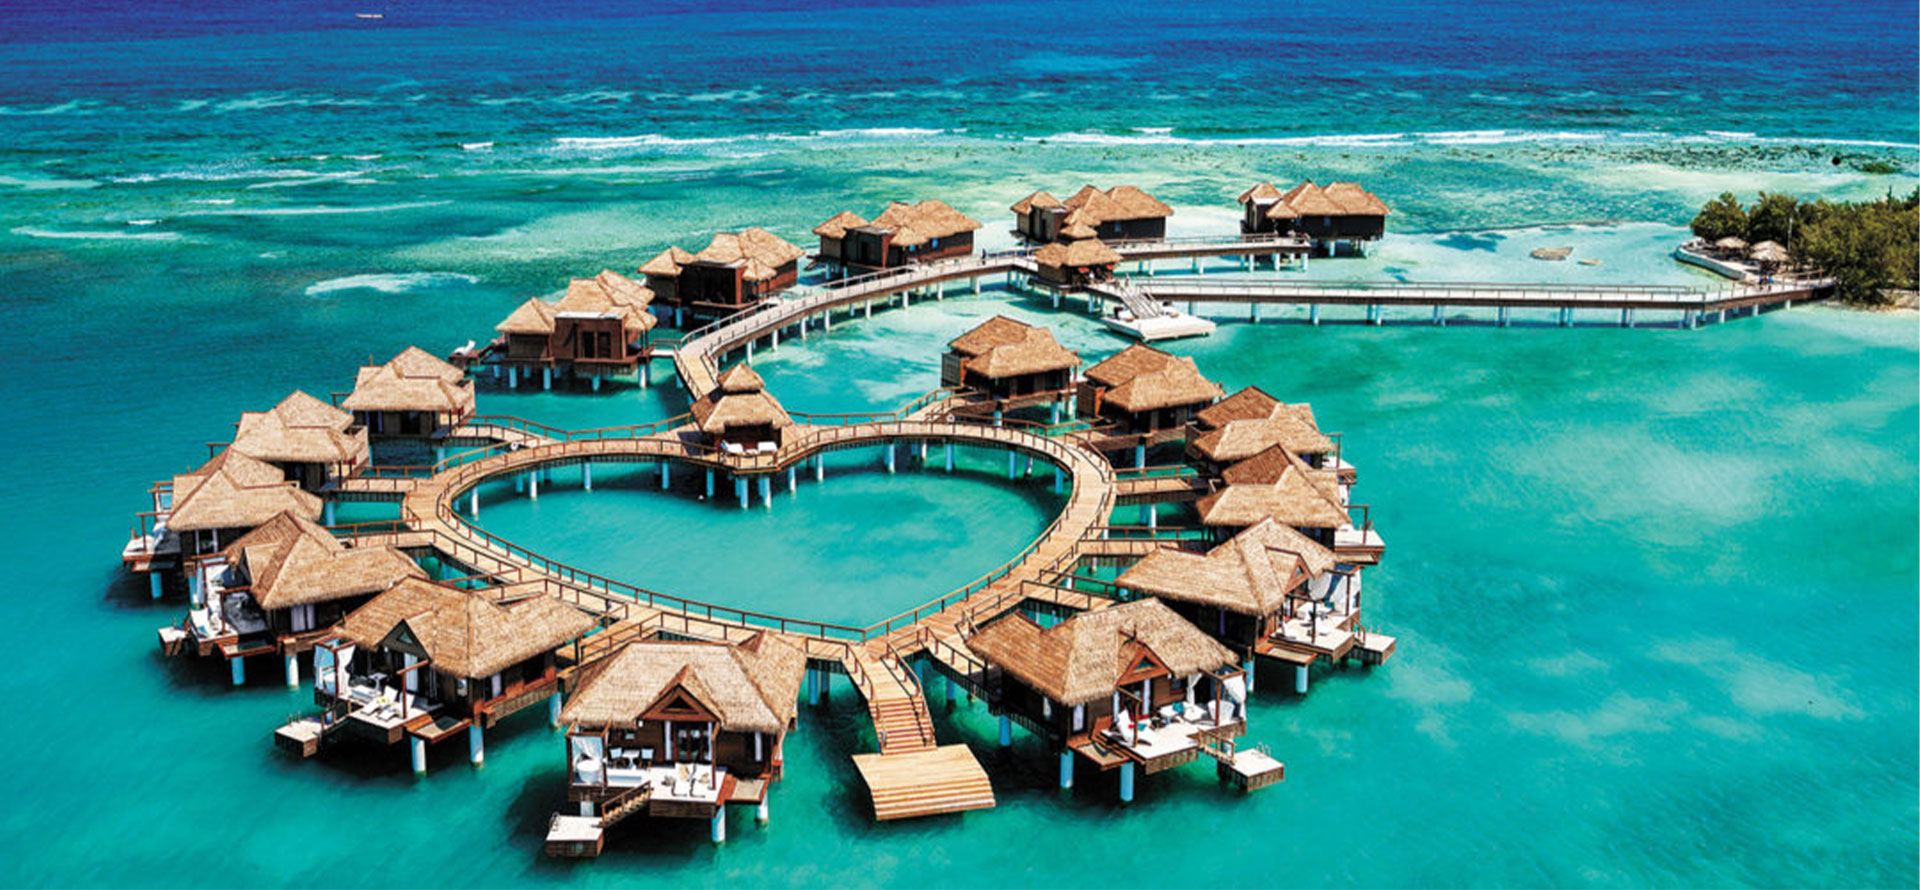 Jamaica overwater bungalows heart-shaped.